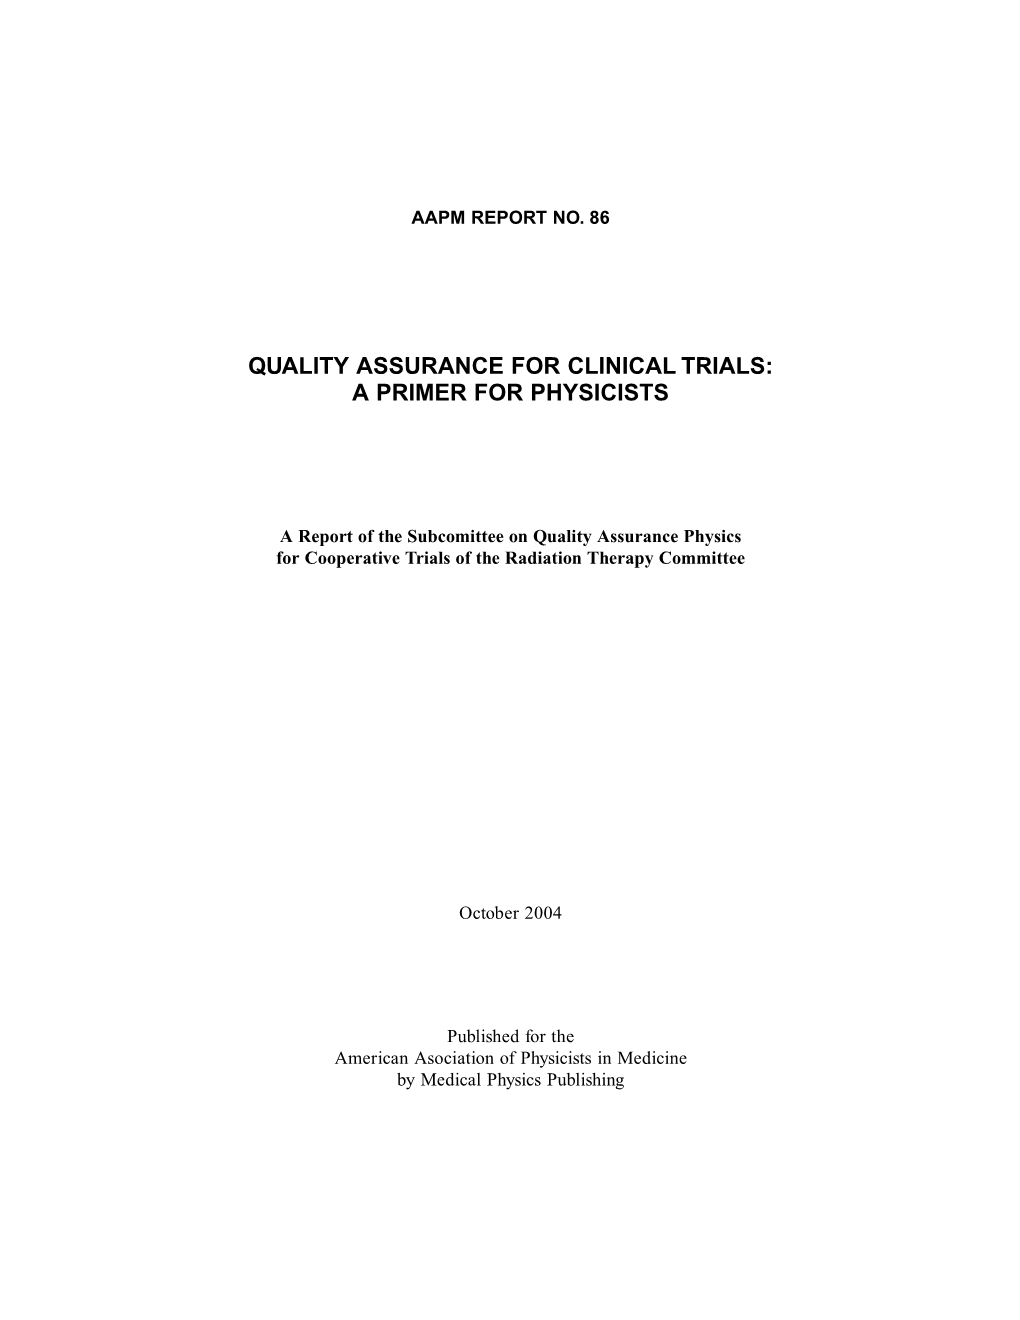 Quality Assurance for Clinical Trials: a Primer for Physicists